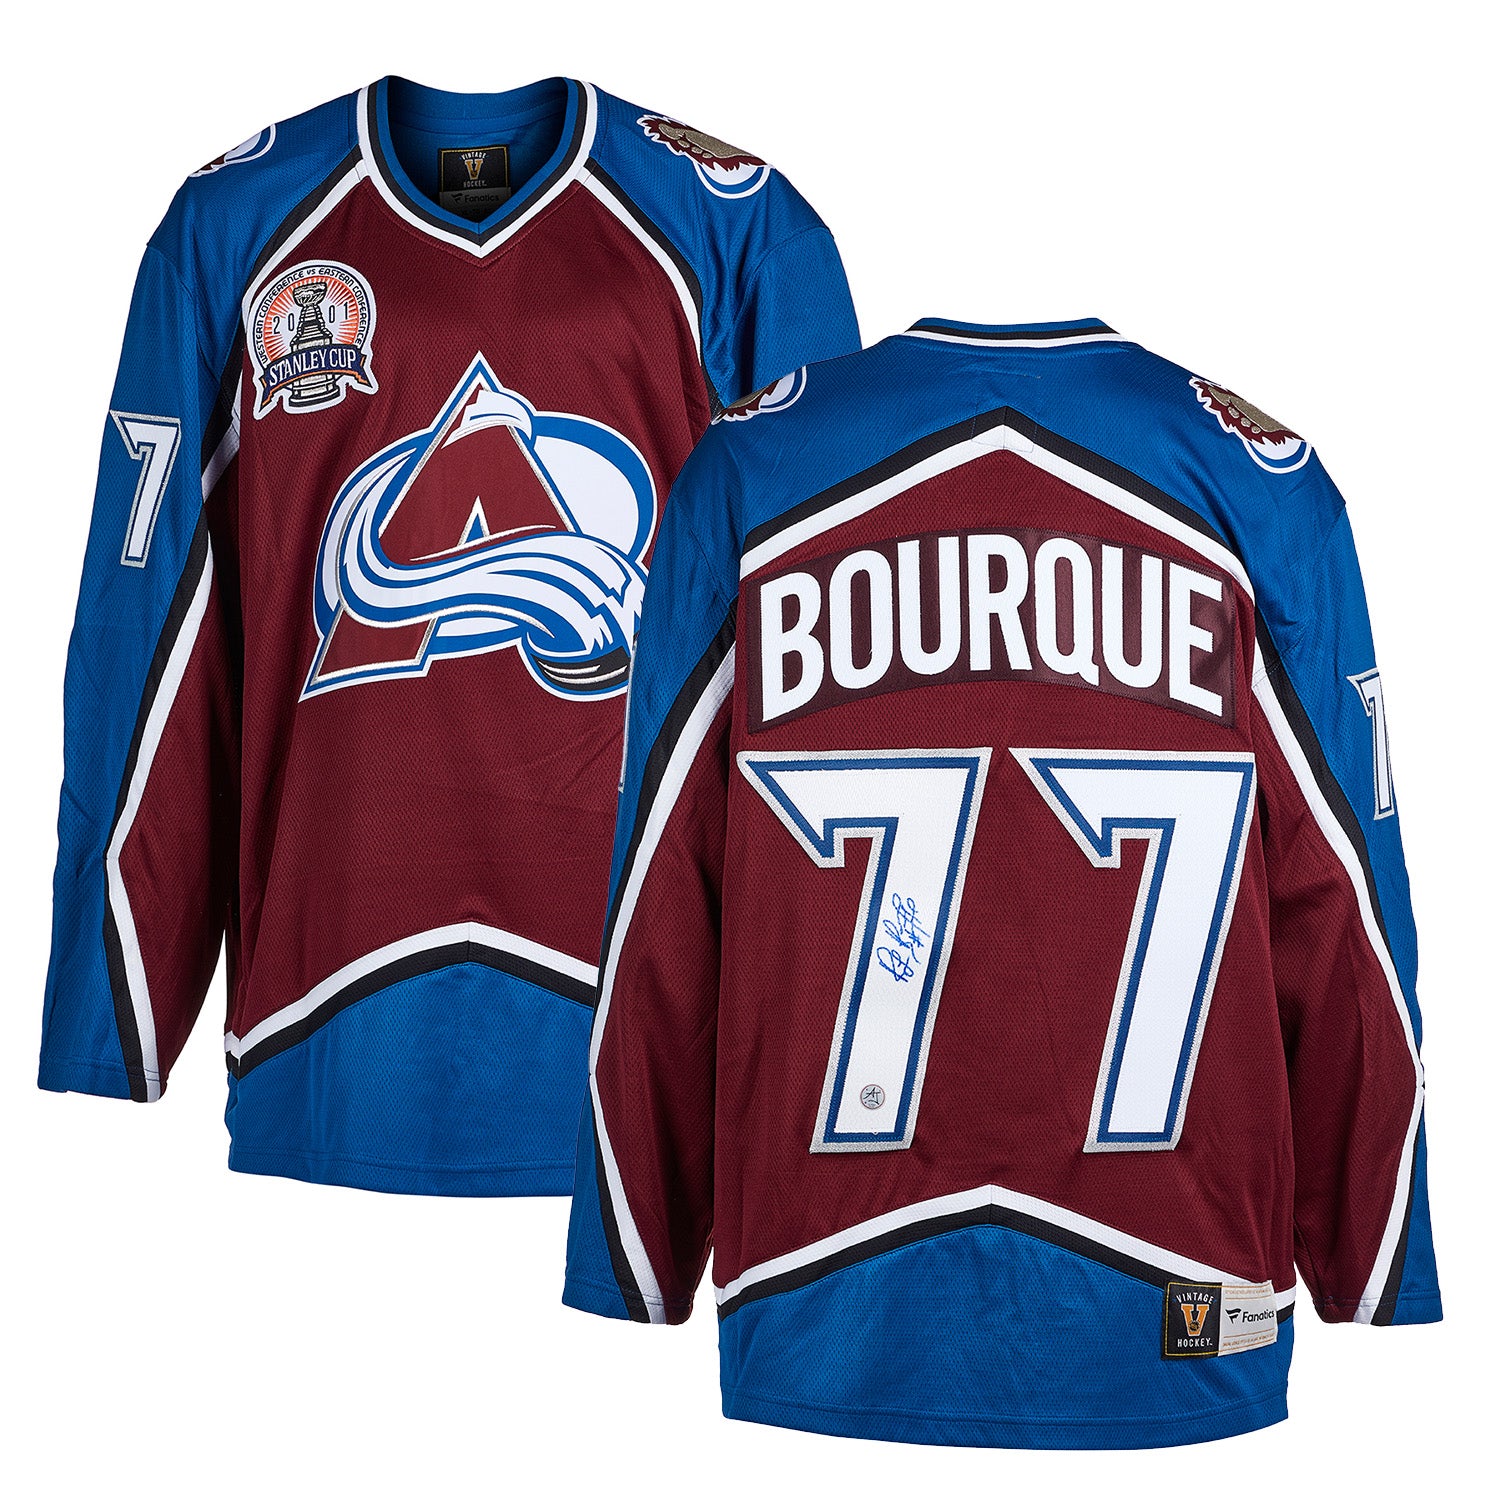 Ray Bourque Colorado Avalanche Signed 2001 Stanley Cup Jersey